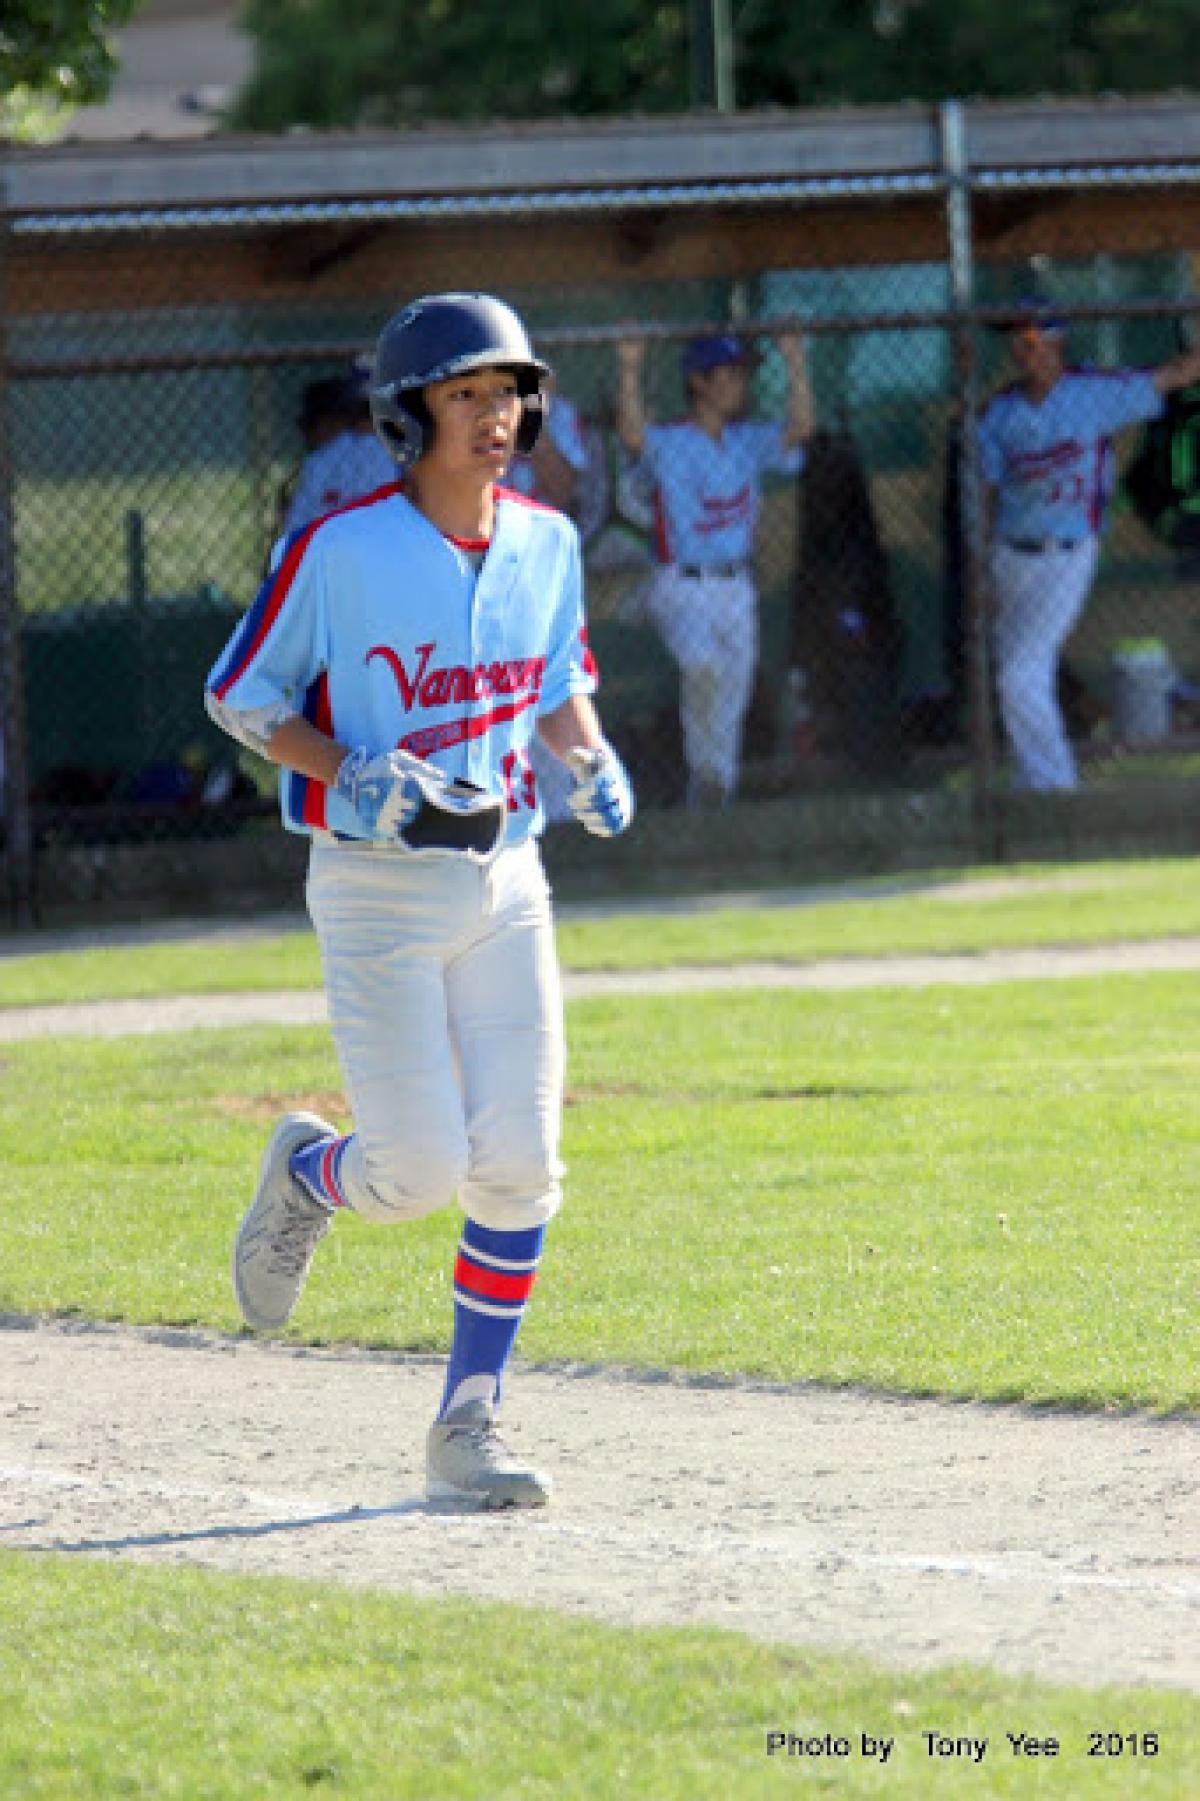 Expos Back on Track With Sunday's Sweep of Kamloops; Scorching Sun Provides Difficulty For Both Teams in Game 2 of the Double Header